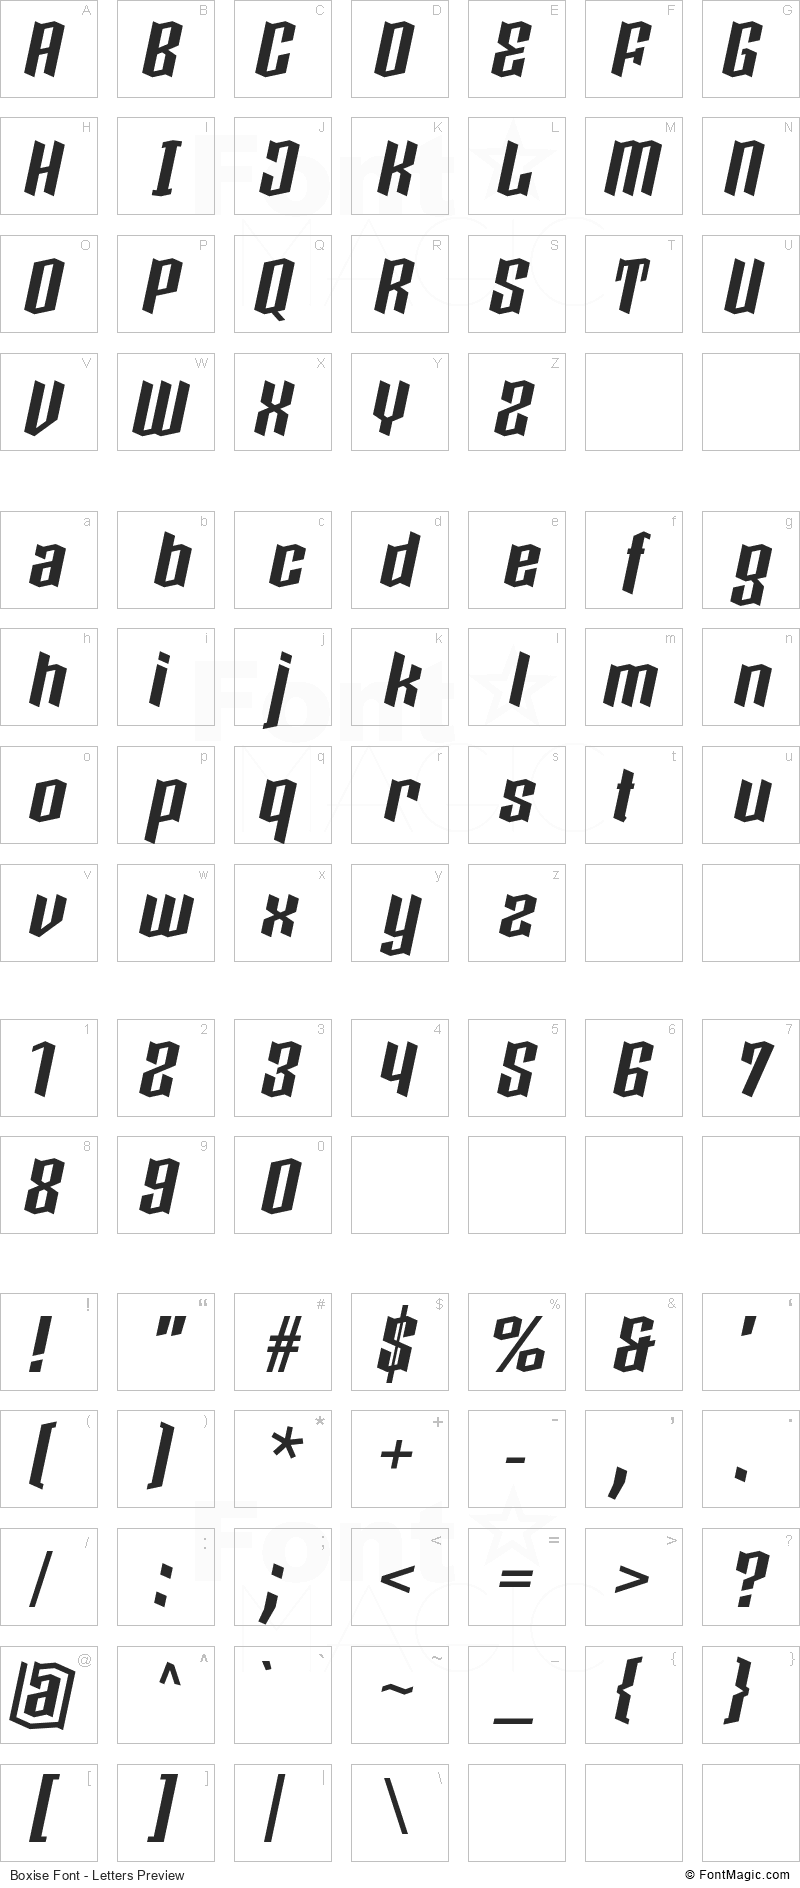 Boxise Font - All Latters Preview Chart